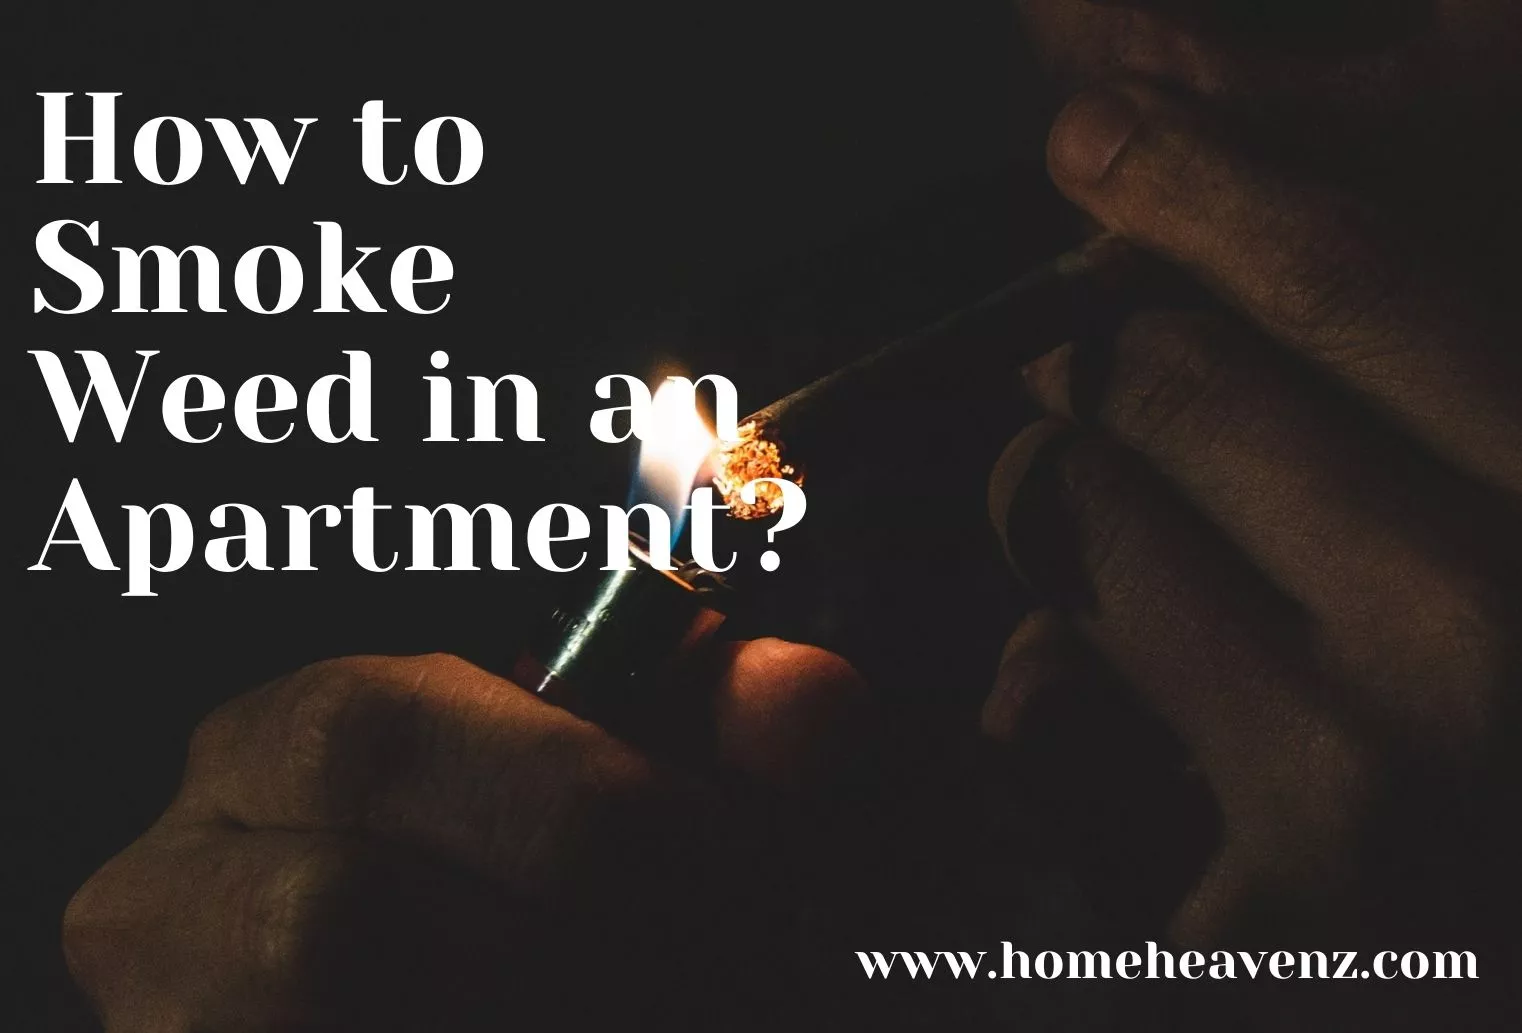 How to Smoke Weed in an Apartment